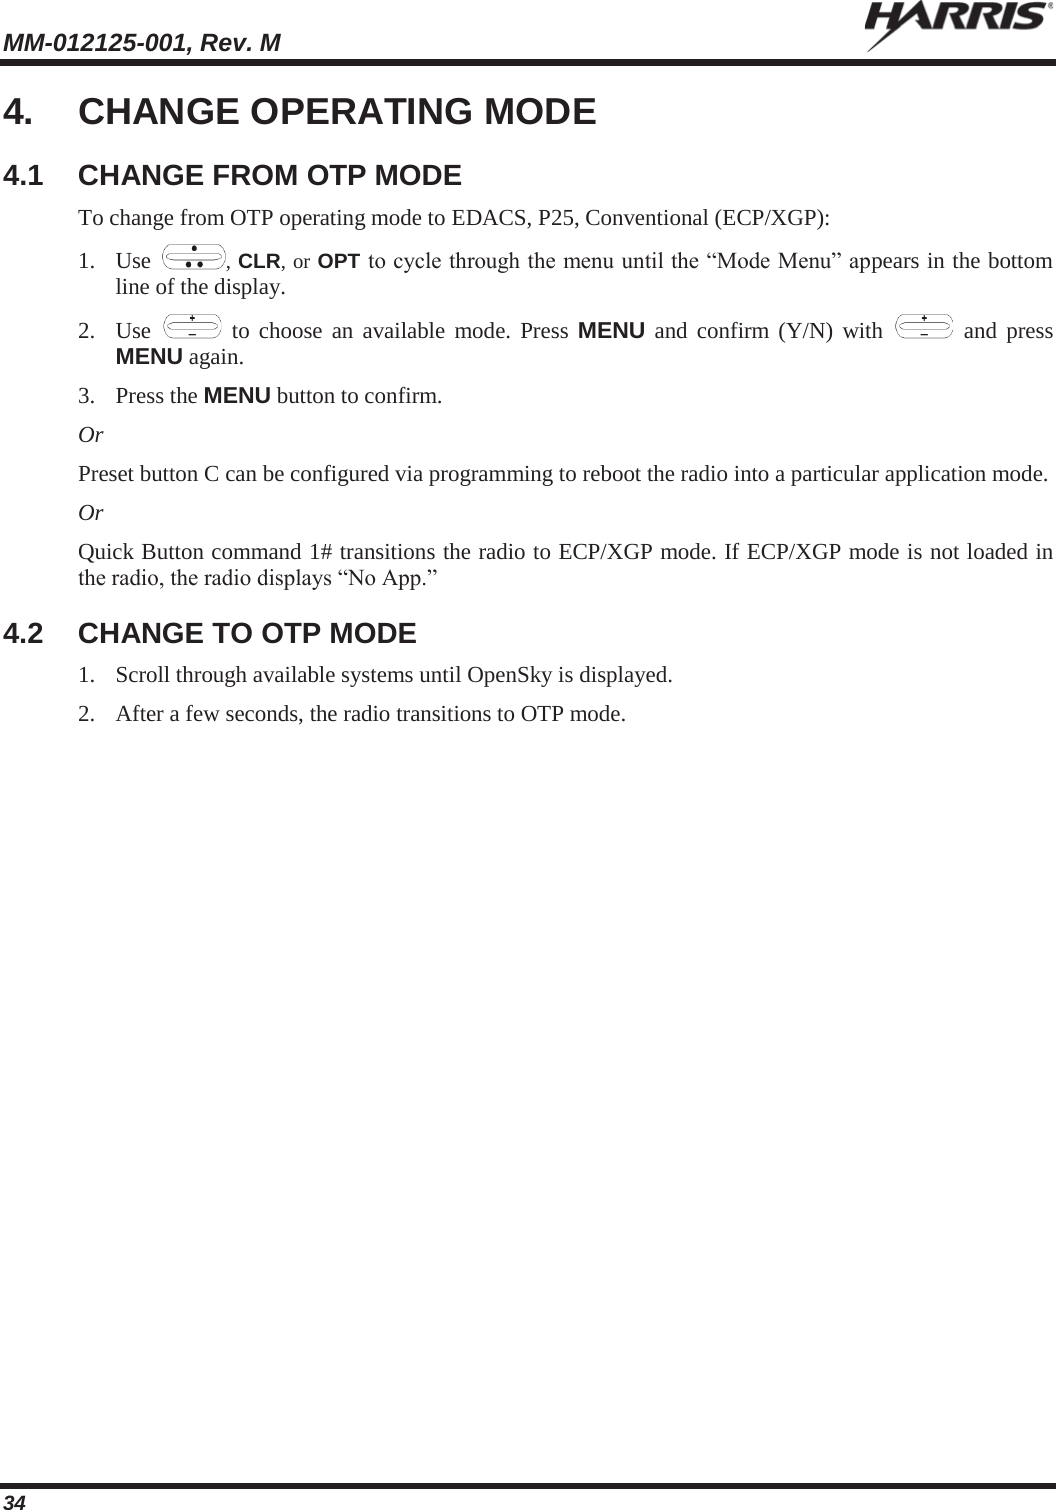 MM-012125-001, Rev. M   34 4. CHANGE OPERATING MODE 4.1 CHANGE FROM OTP MODE To change from OTP operating mode to EDACS, P25, Conventional (ECP/XGP): 1. Use  , CLR, or OPT to cycle through the menu until the “Mode Menu” appears in the bottom line of the display. 2. Use   to choose an available mode. Press MENU and confirm (Y/N) with   and press MENU again. 3. Press the MENU button to confirm.  Or Preset button C can be configured via programming to reboot the radio into a particular application mode. Or Quick Button command 1# transitions the radio to ECP/XGP mode. If ECP/XGP mode is not loaded in the radio, the radio displays “No App.” 4.2  CHANGE TO OTP MODE 1. Scroll through available systems until OpenSky is displayed.  2. After a few seconds, the radio transitions to OTP mode. 